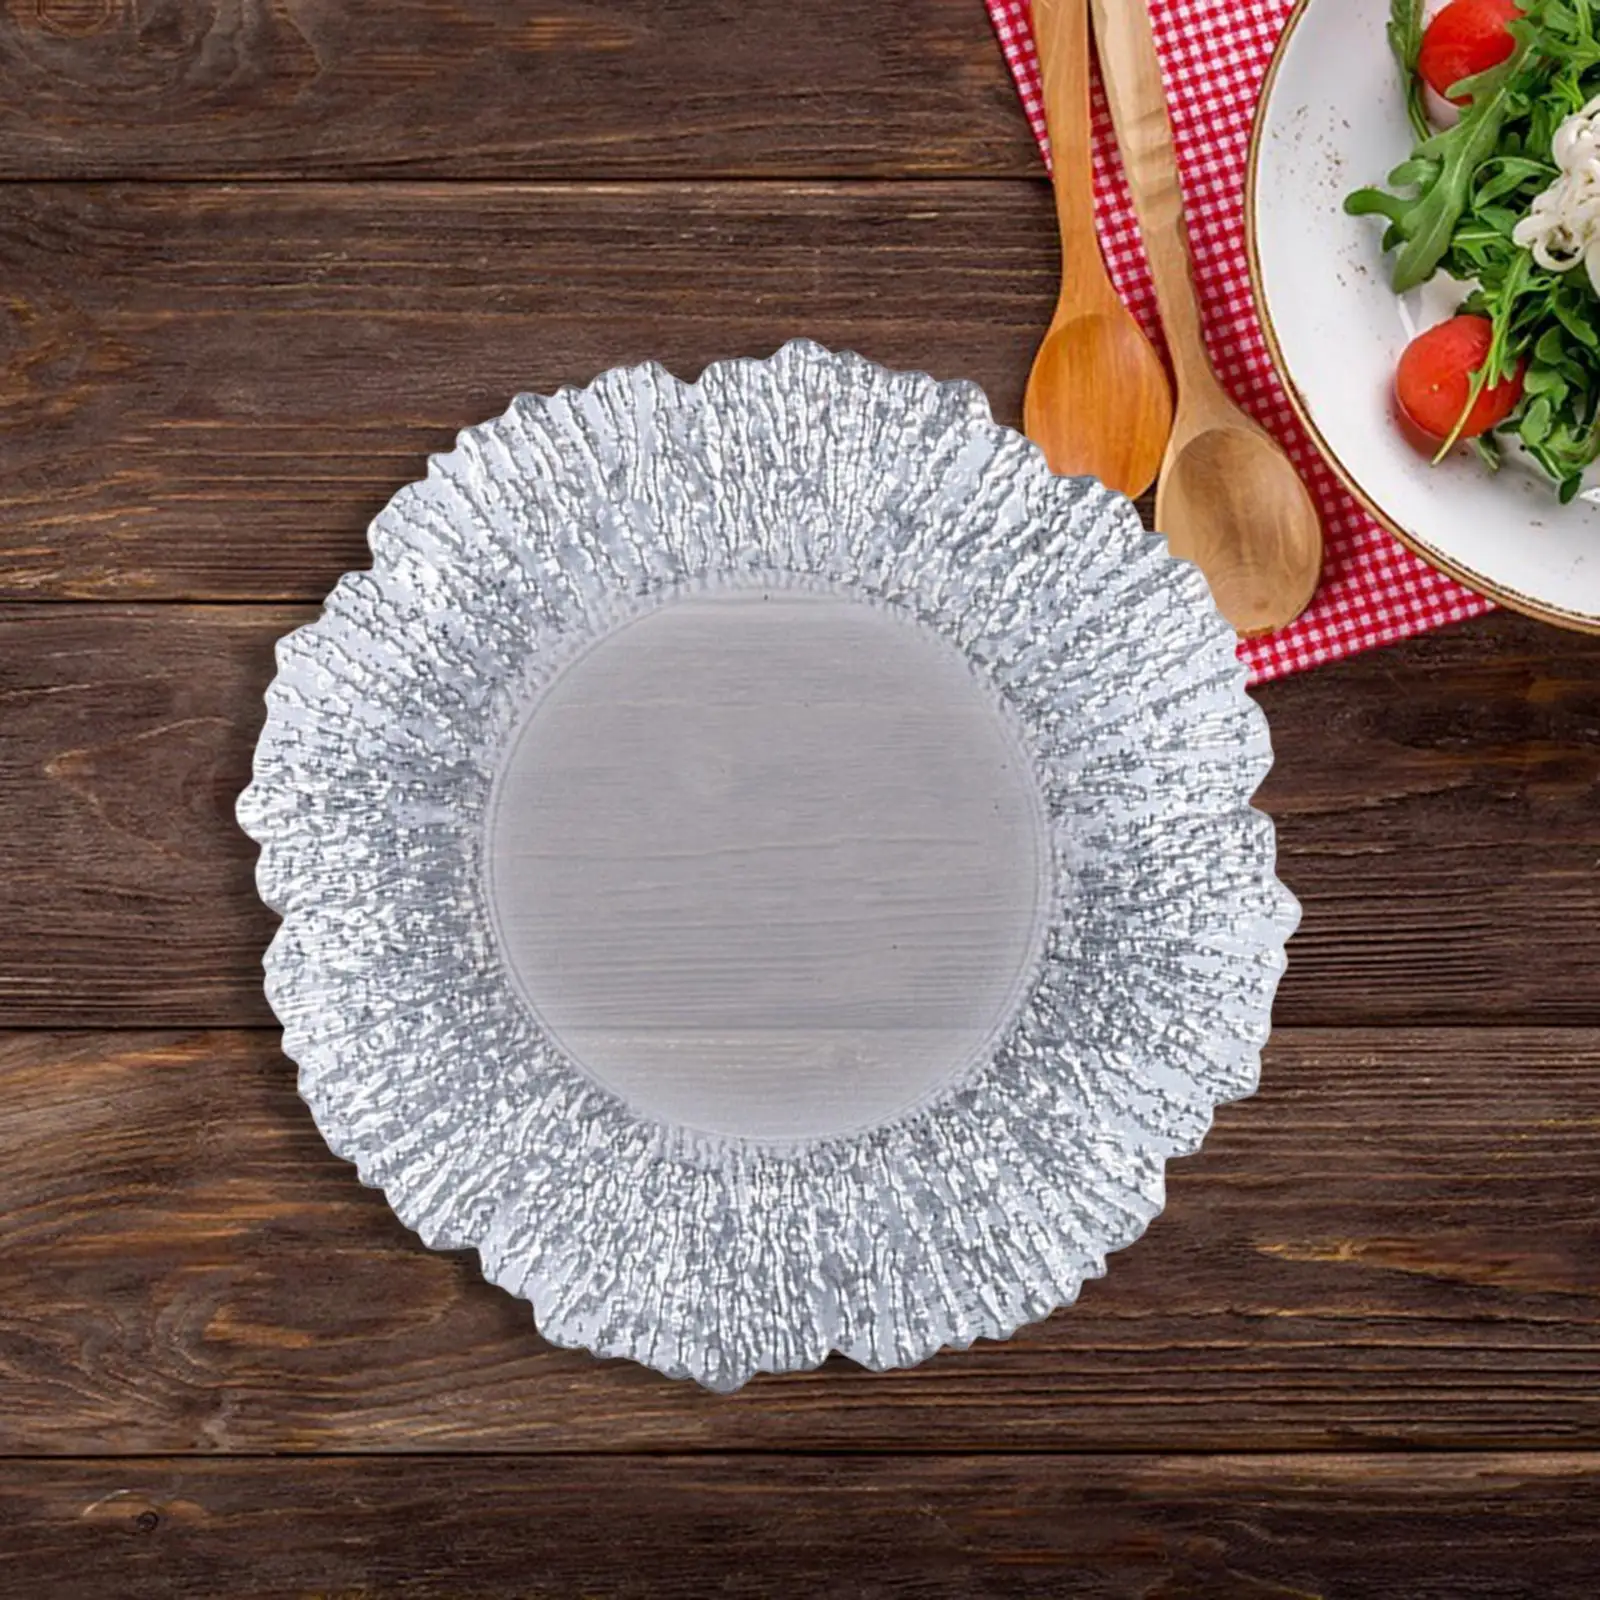 Foils Decorative Service Platter Serving Tray Indoor Outdoor Decorations Glass Round Dish for Salad Appetizer Pasta, Snack Home